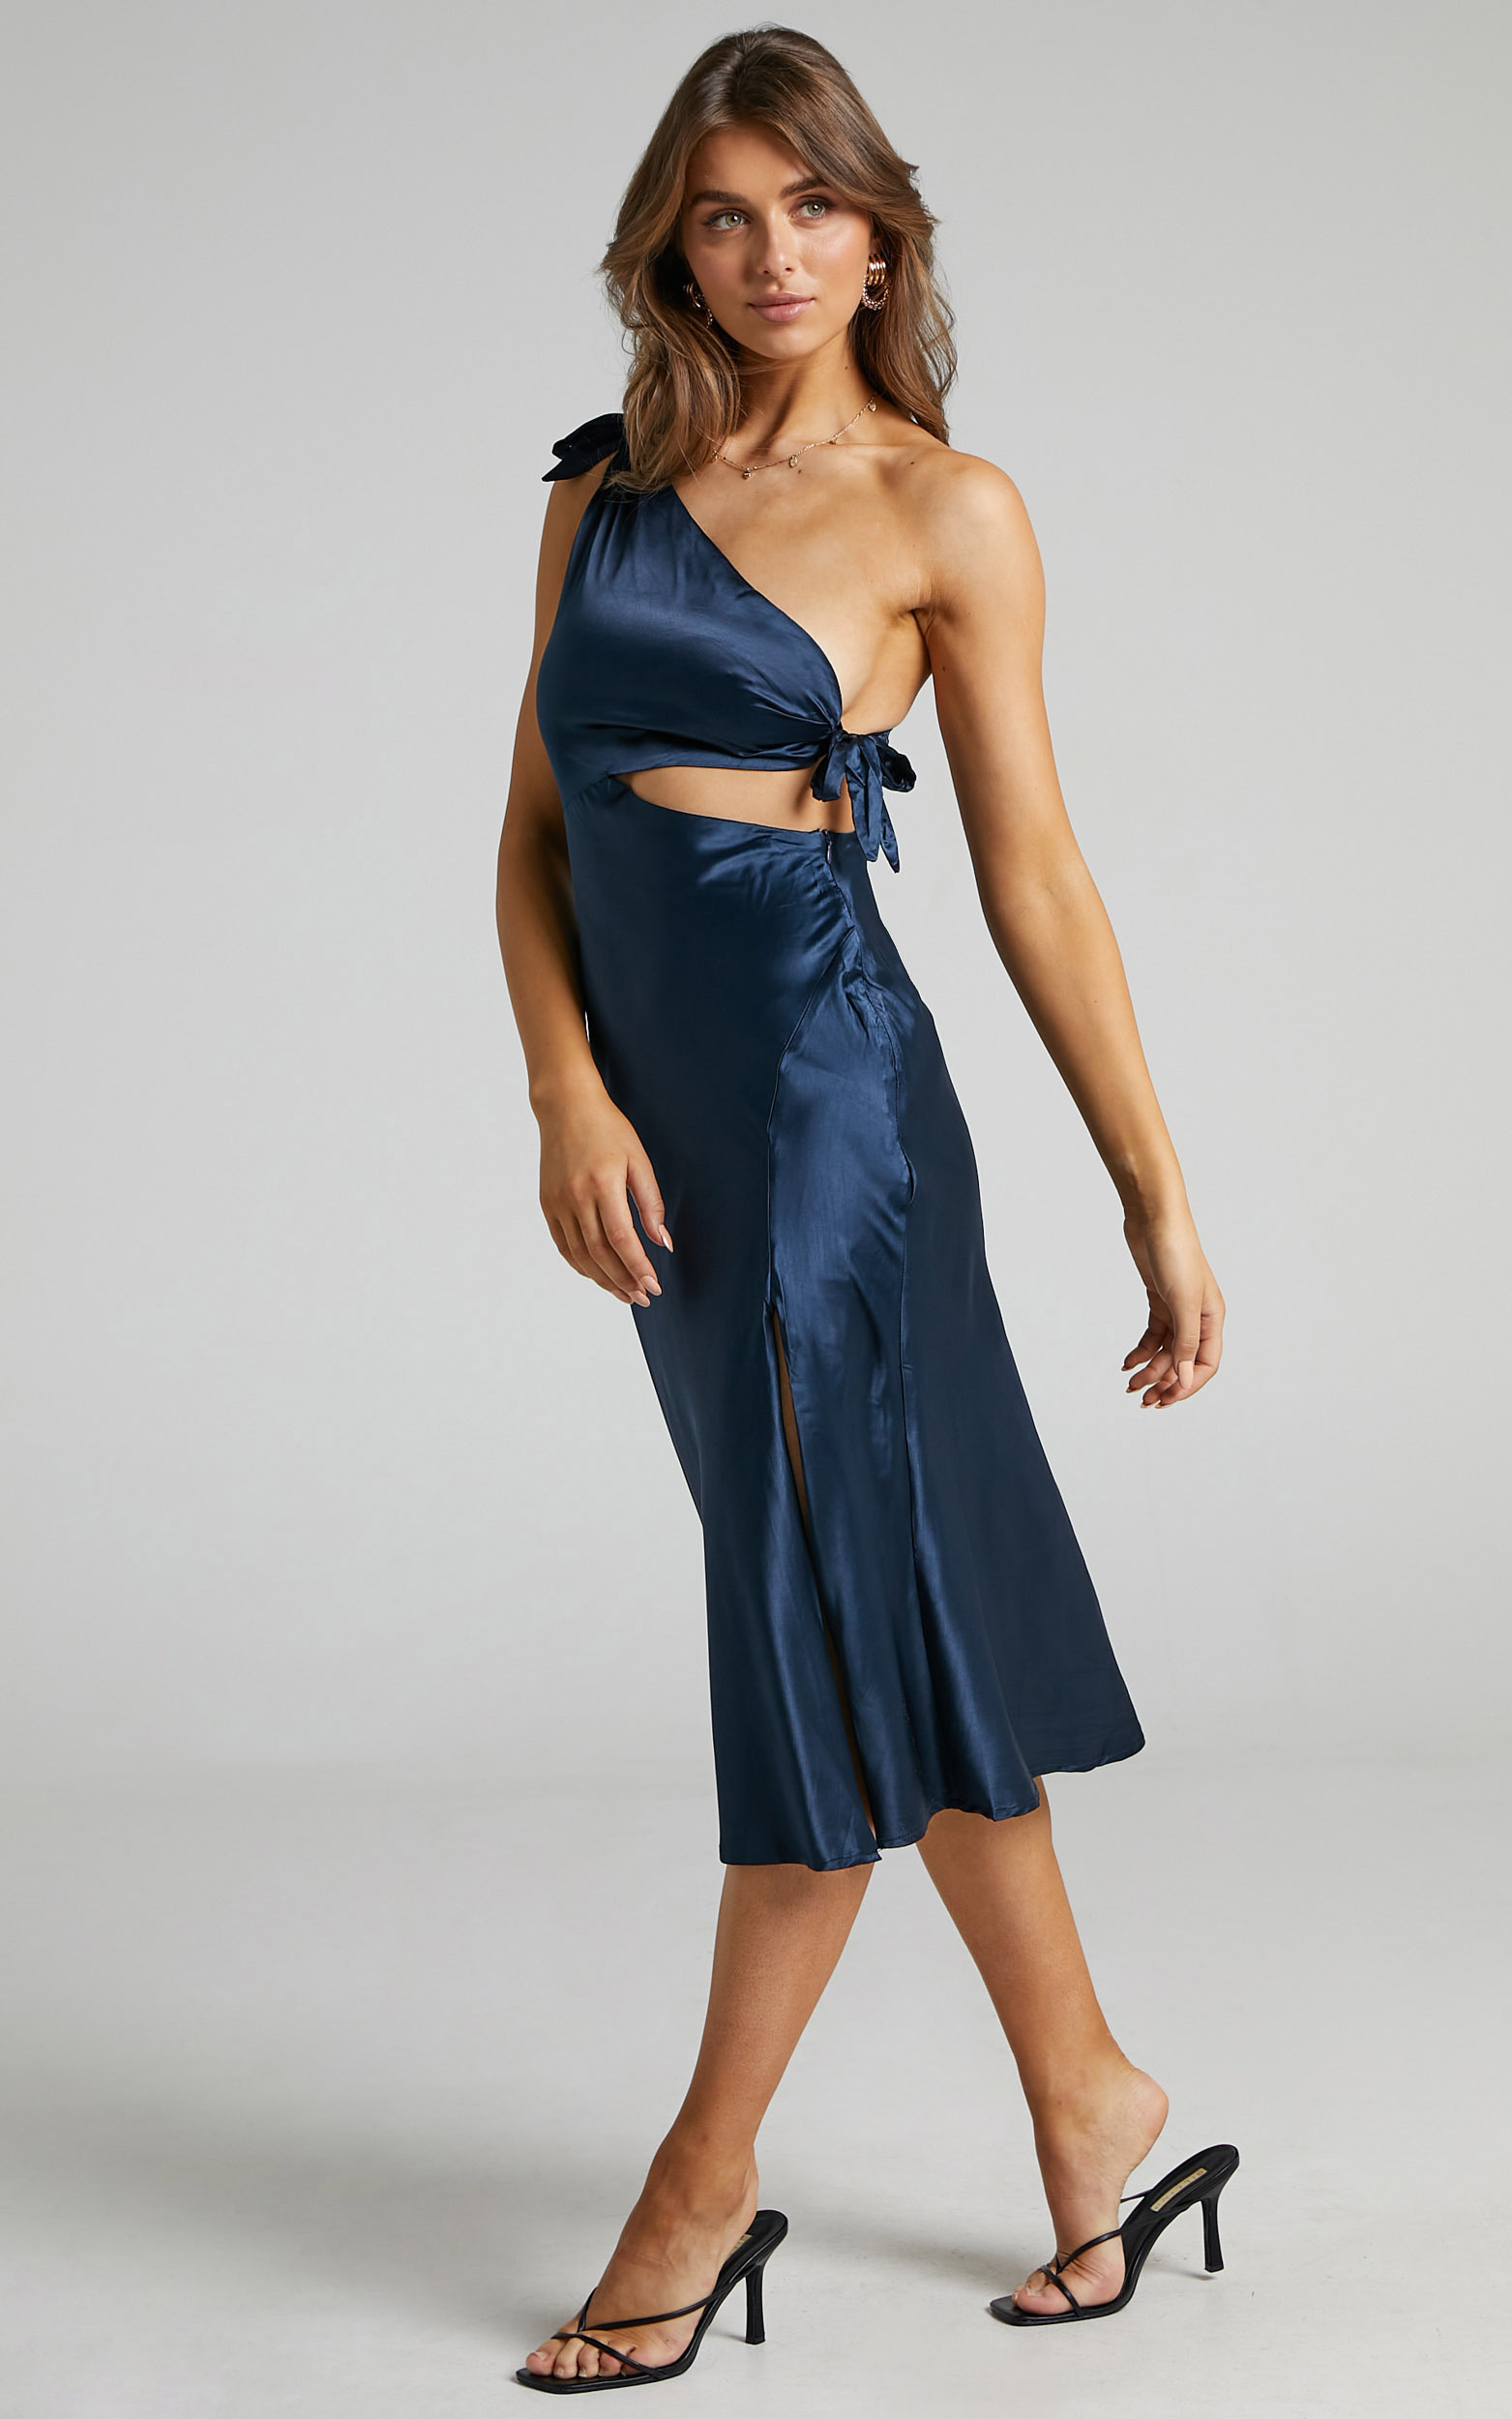 Glaucus Dress in Navy Satin - 06, NVY2, hi-res image number null